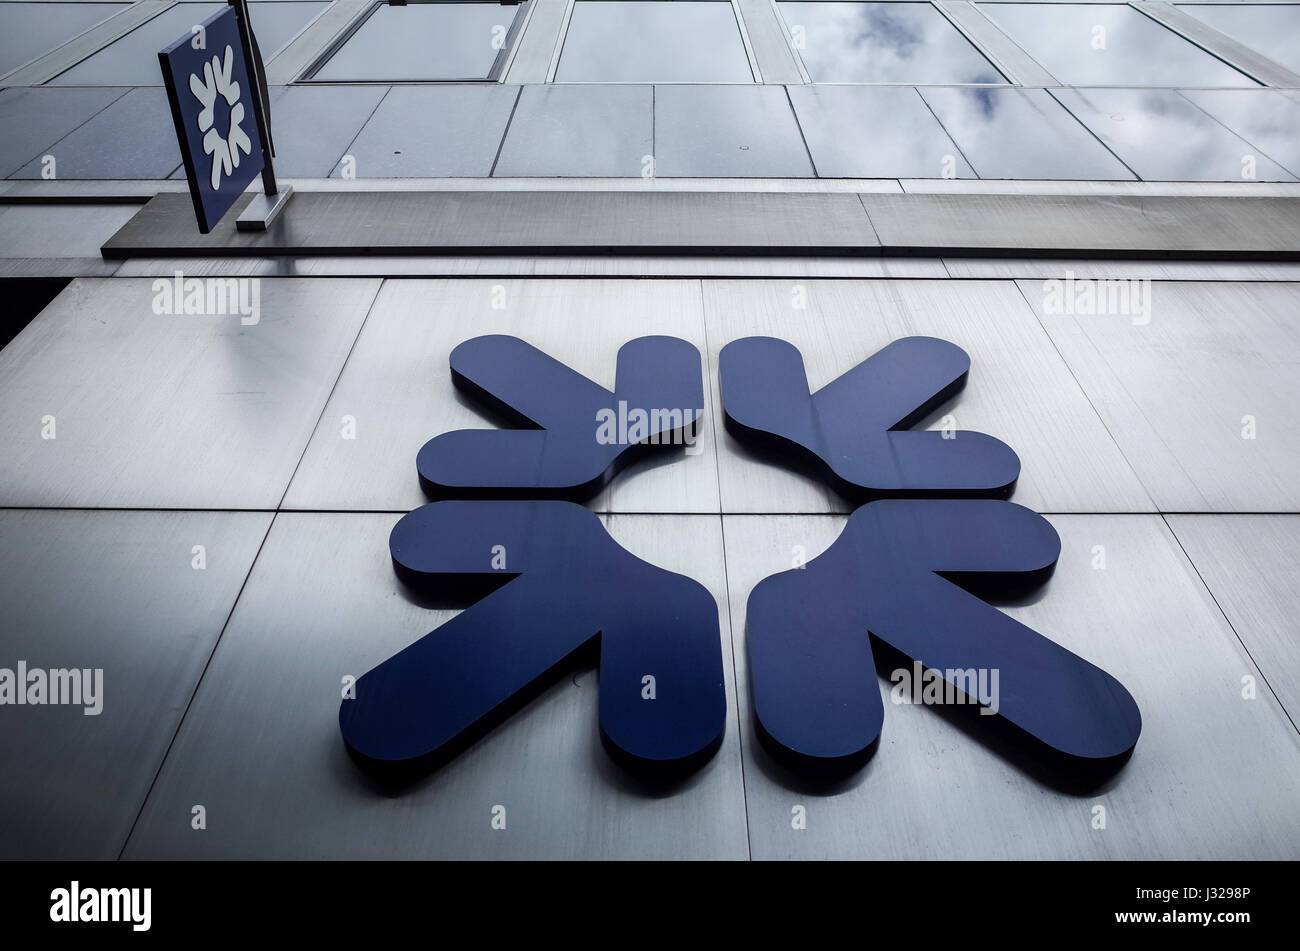 RBS London - Logos and Signs outside a Royal Bank of Scotland (RBS) branch in the City of London financial district, UK. Stock Photo